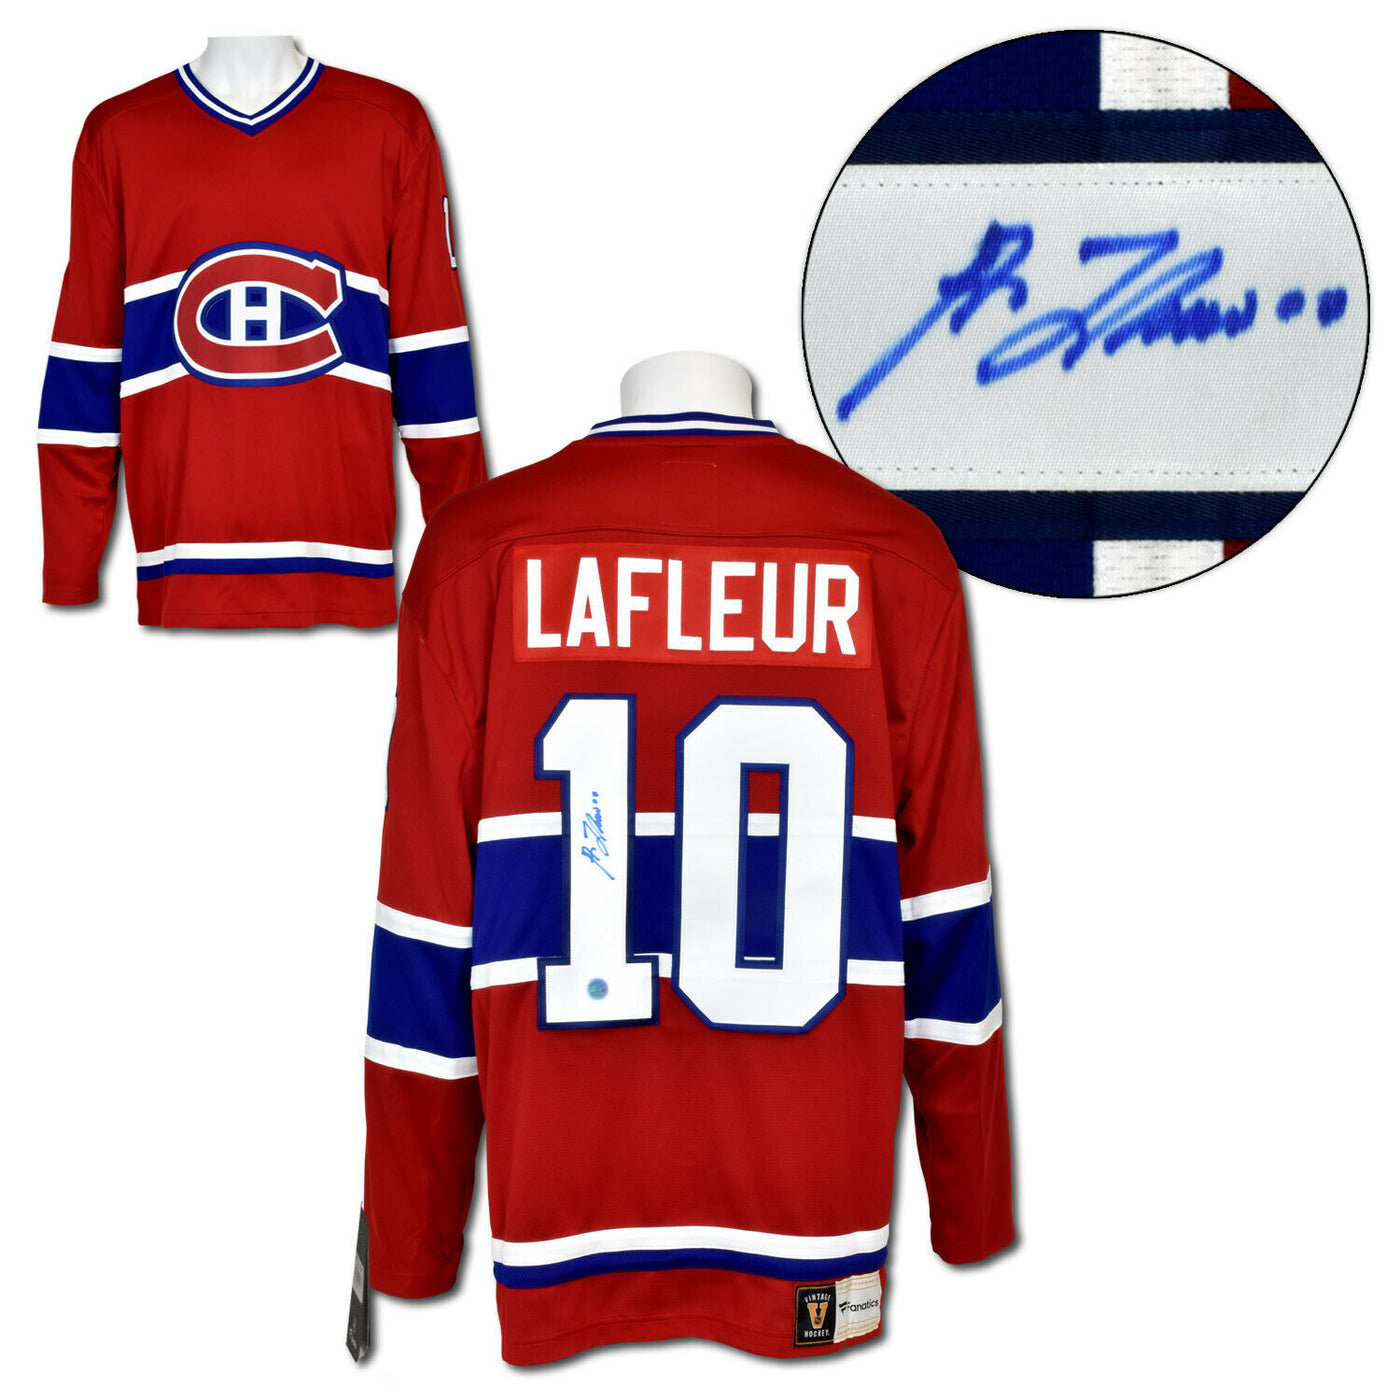 Guy Lafleur Montreal Canadiens Autographed Red Fanatics Jersey